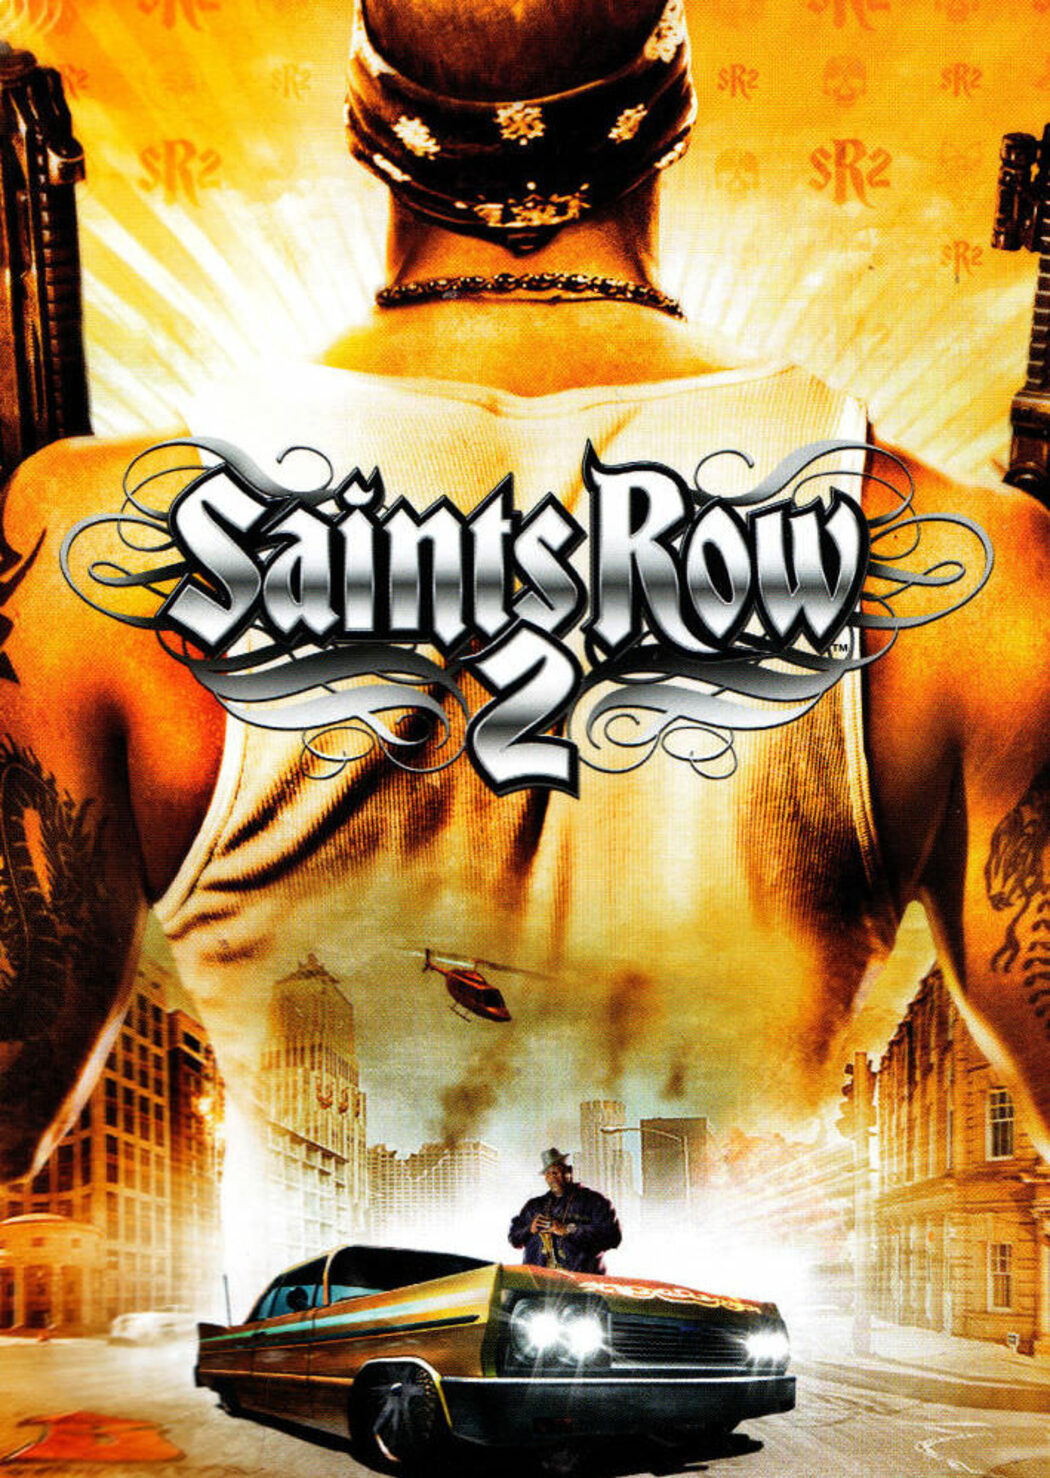 GOG Have Saints Row 2 For Free! – Play3r